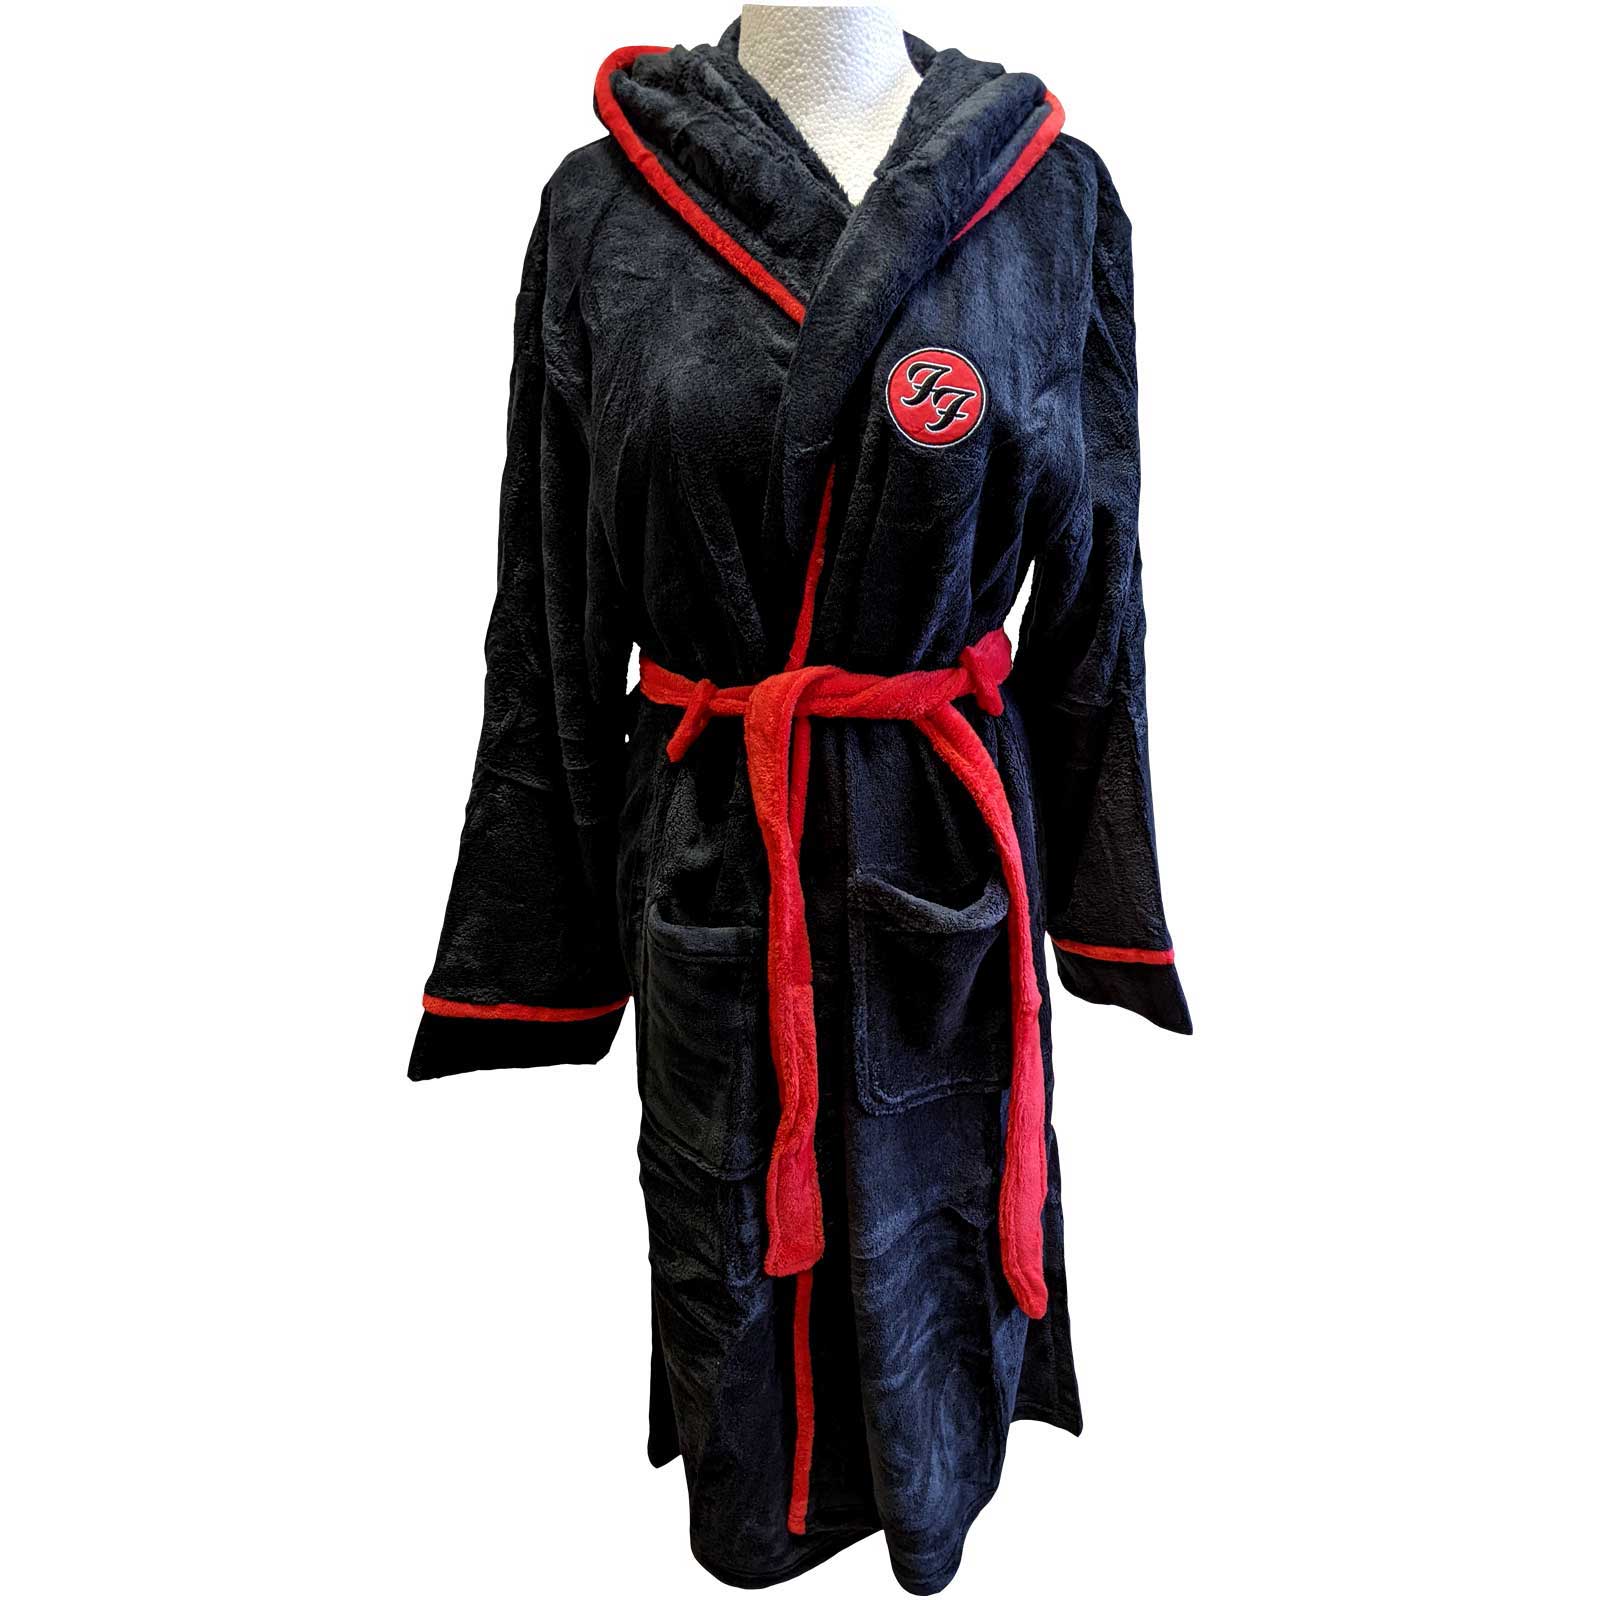 Foo Fighters Bathrobe - Official Licensed Music Design - Worldwide Shipping